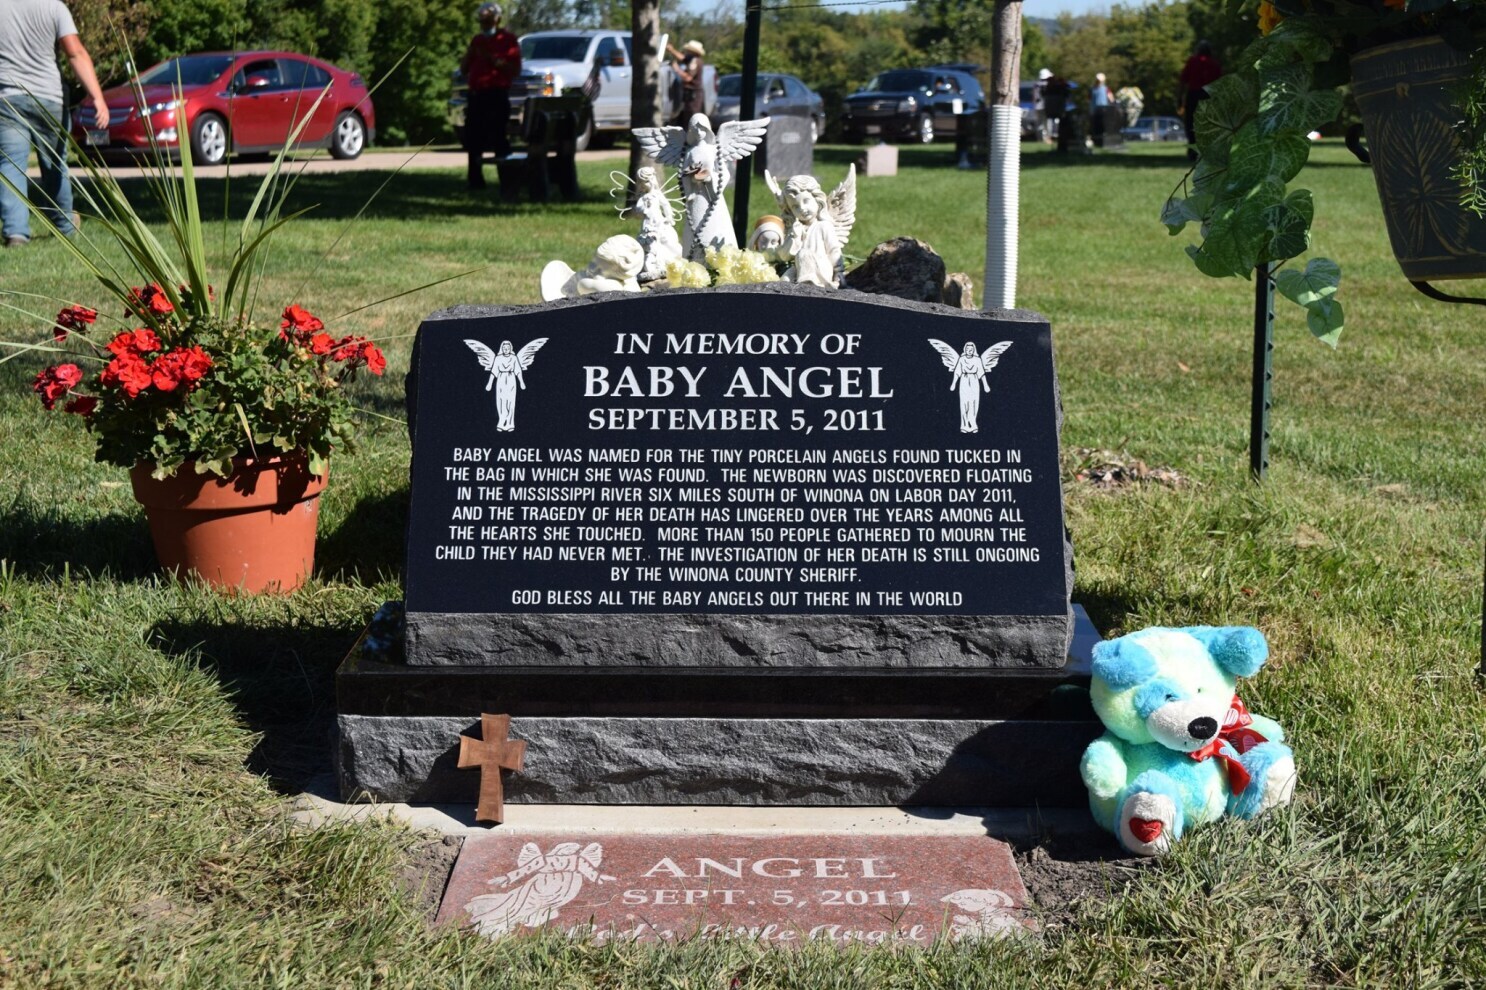 [IMAGE] They called her 'Baby Angel.' Now, forensic genealogy might finally ID infant found in Mississippi River